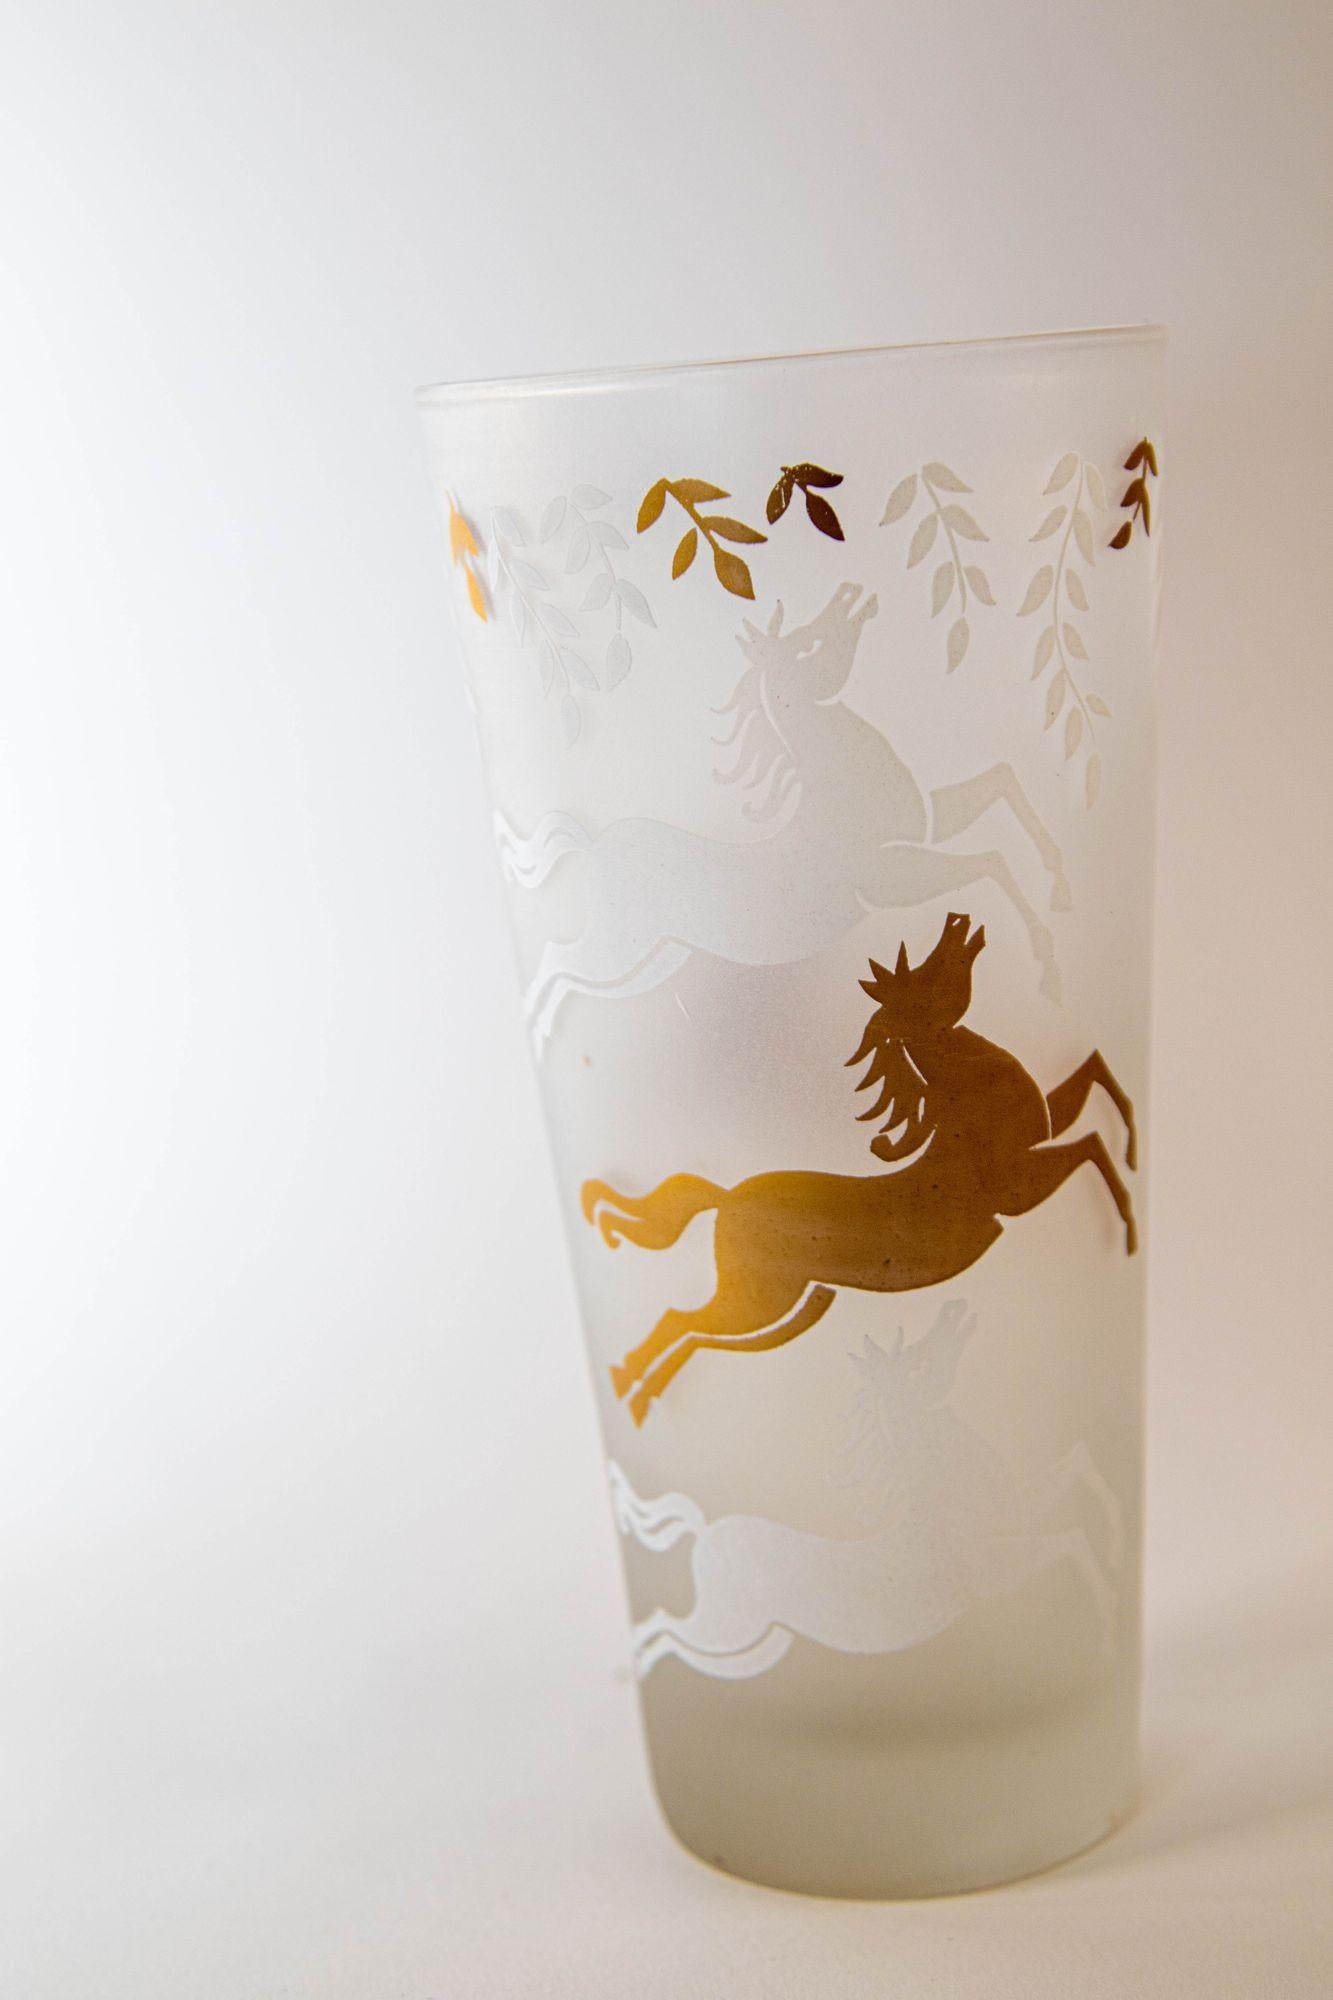 1950 Tumbler Frosted Drink Glasses Cavalcade by Libbey Galloping Horse Set of 5 In Good Condition For Sale In North Hollywood, CA